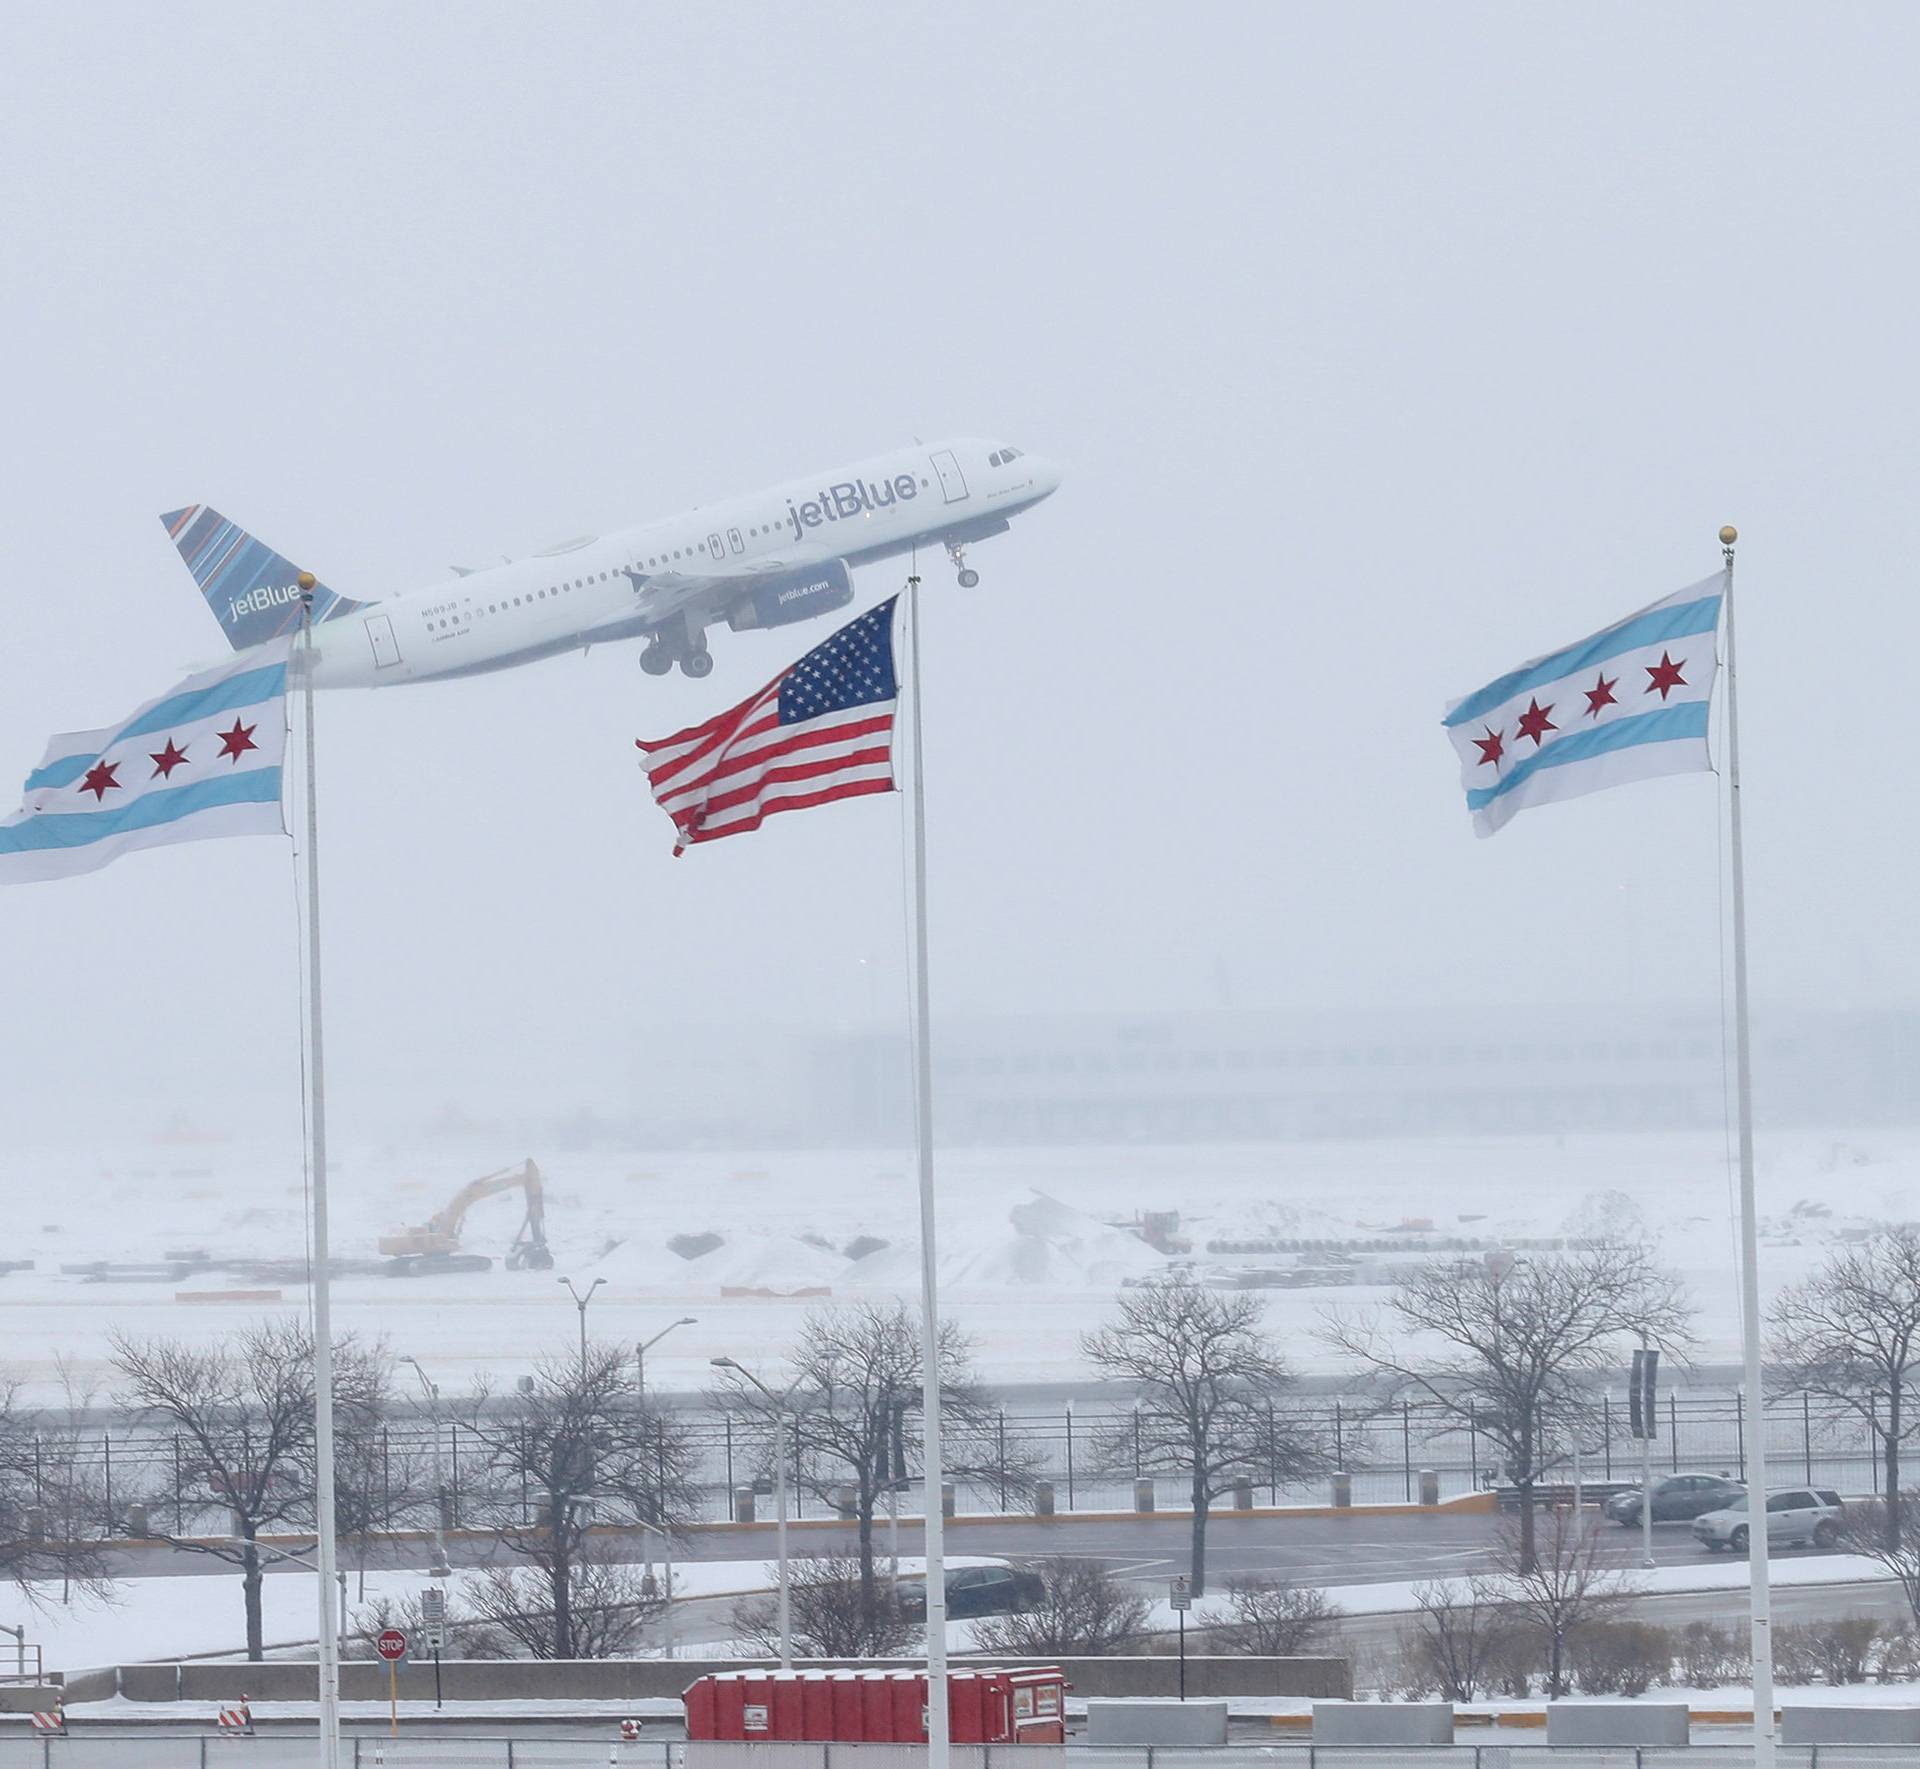 A JetBlue plane departs during the snowstorm at O'Hare International Airport in Chicago